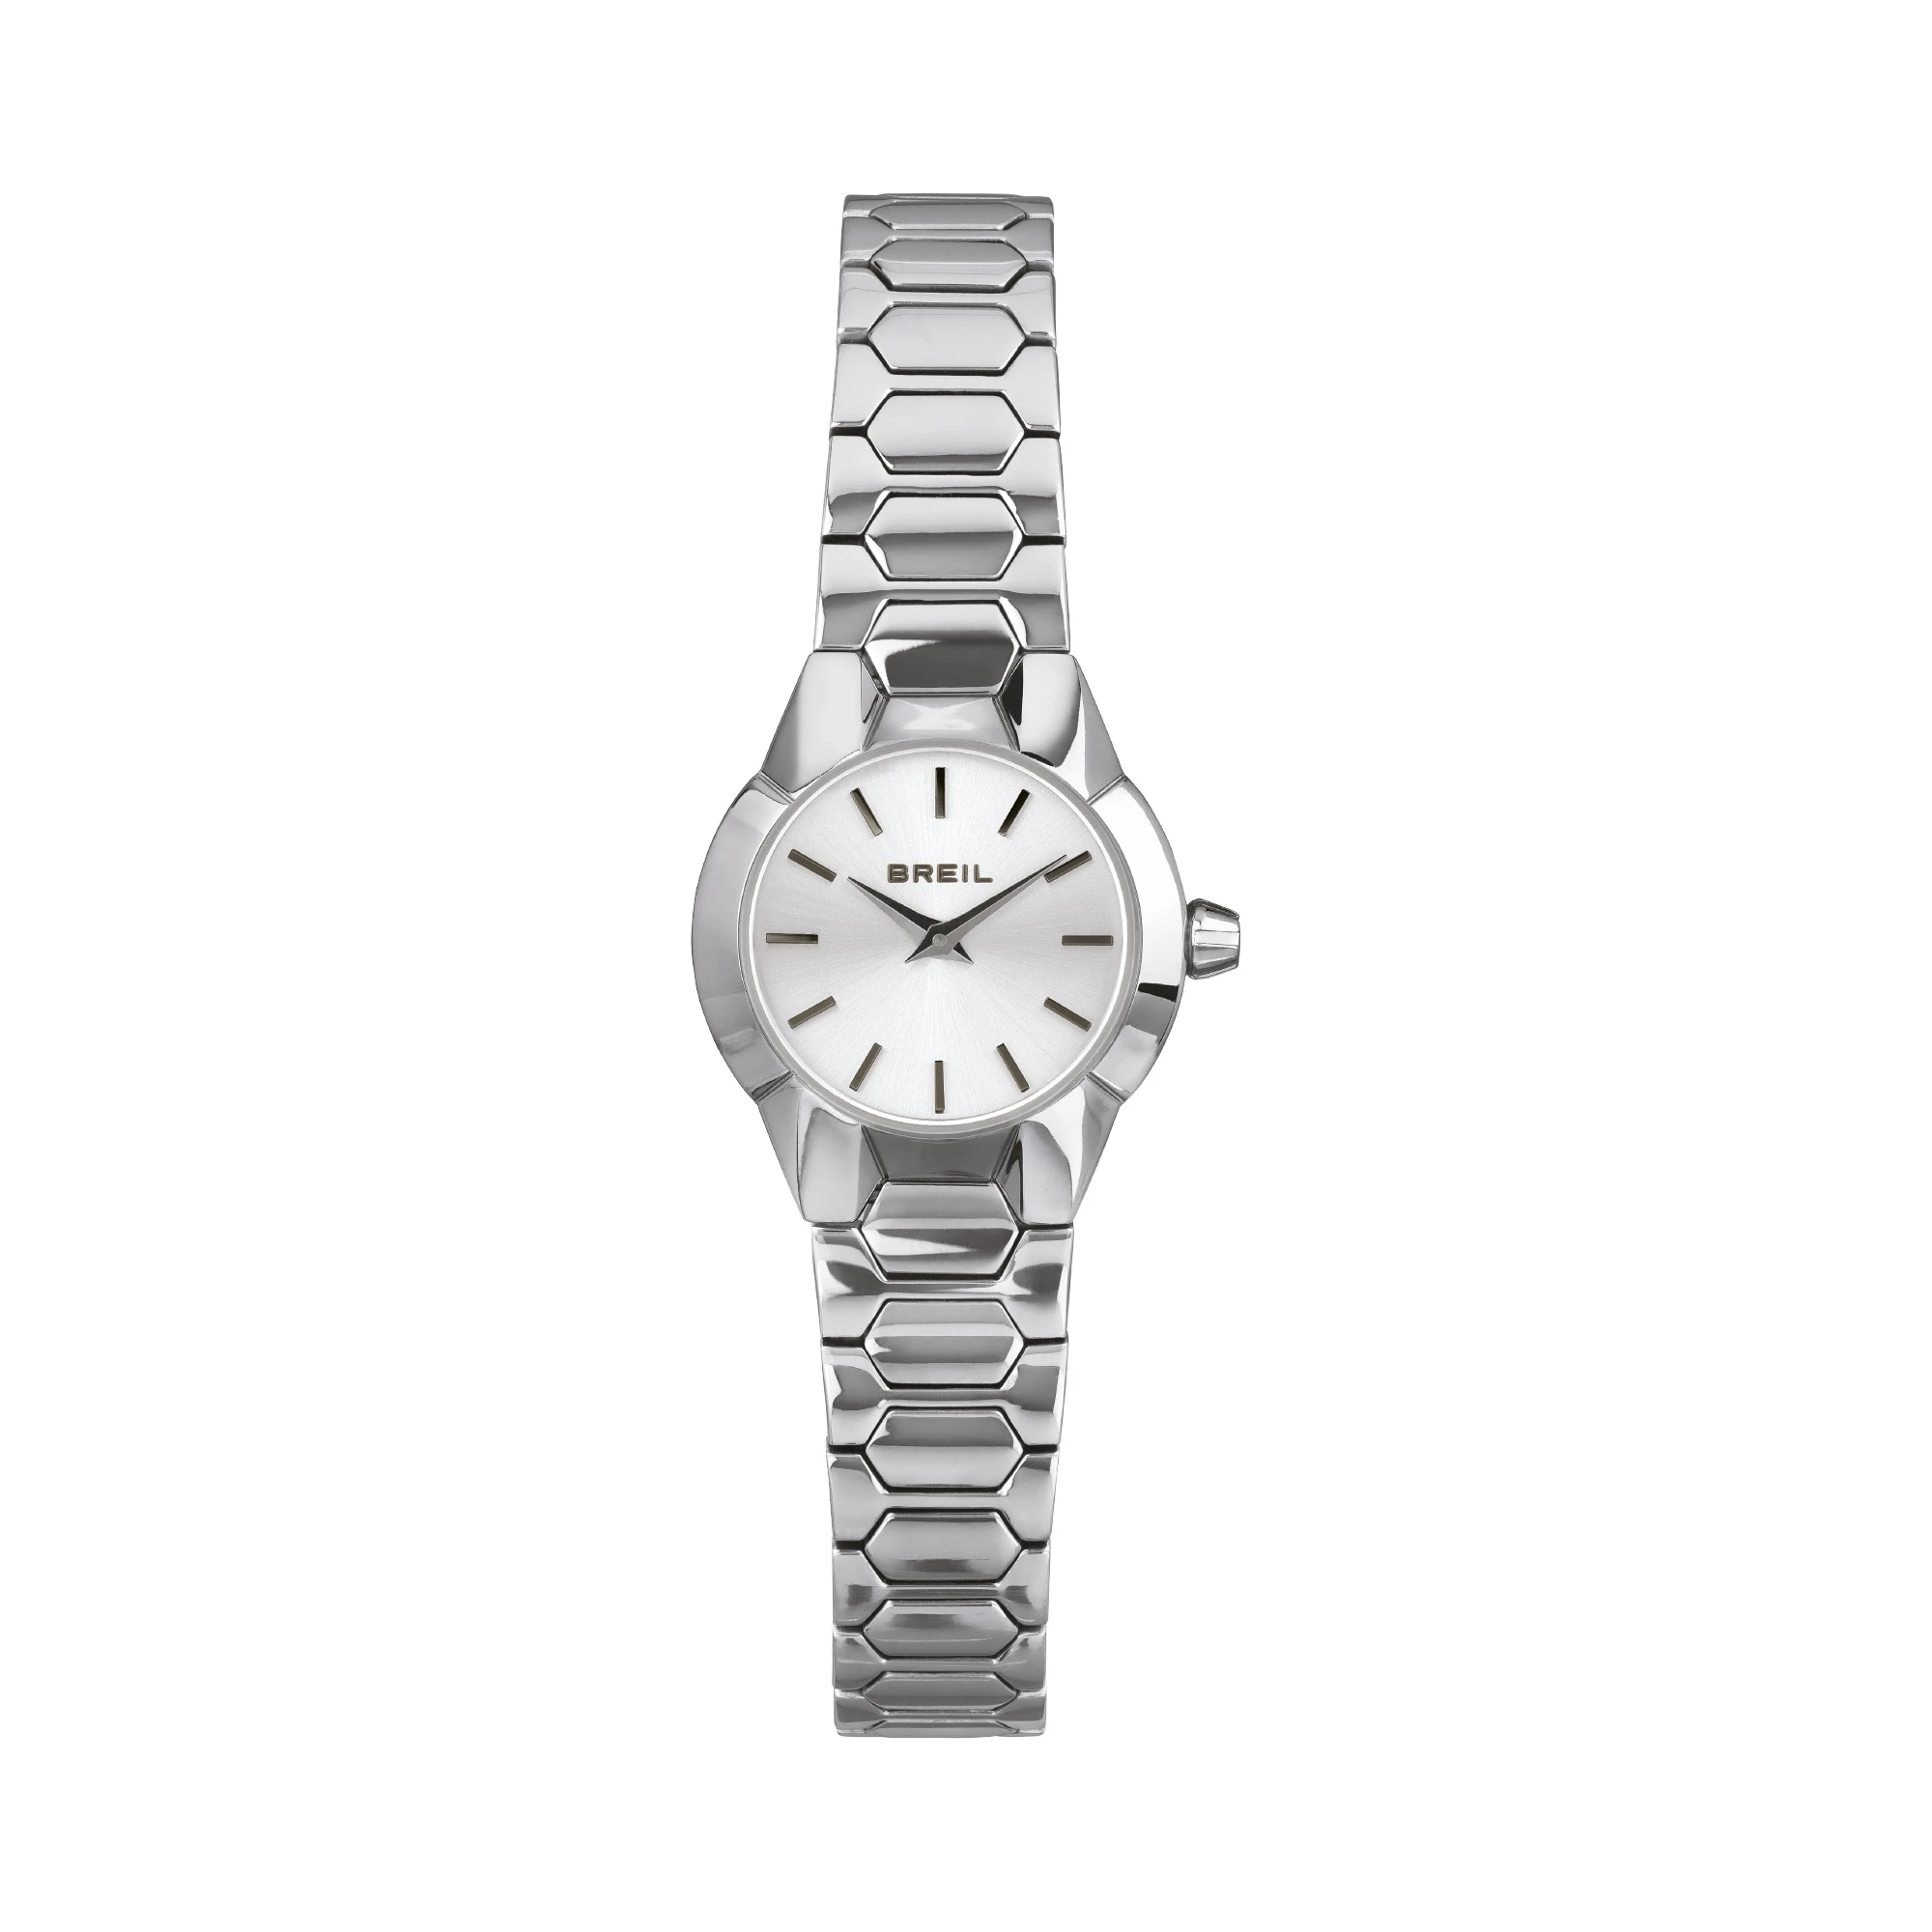 NEW ONE - SOLO TEMPO LADY 24 MM - 1 - TW1856 | Breil